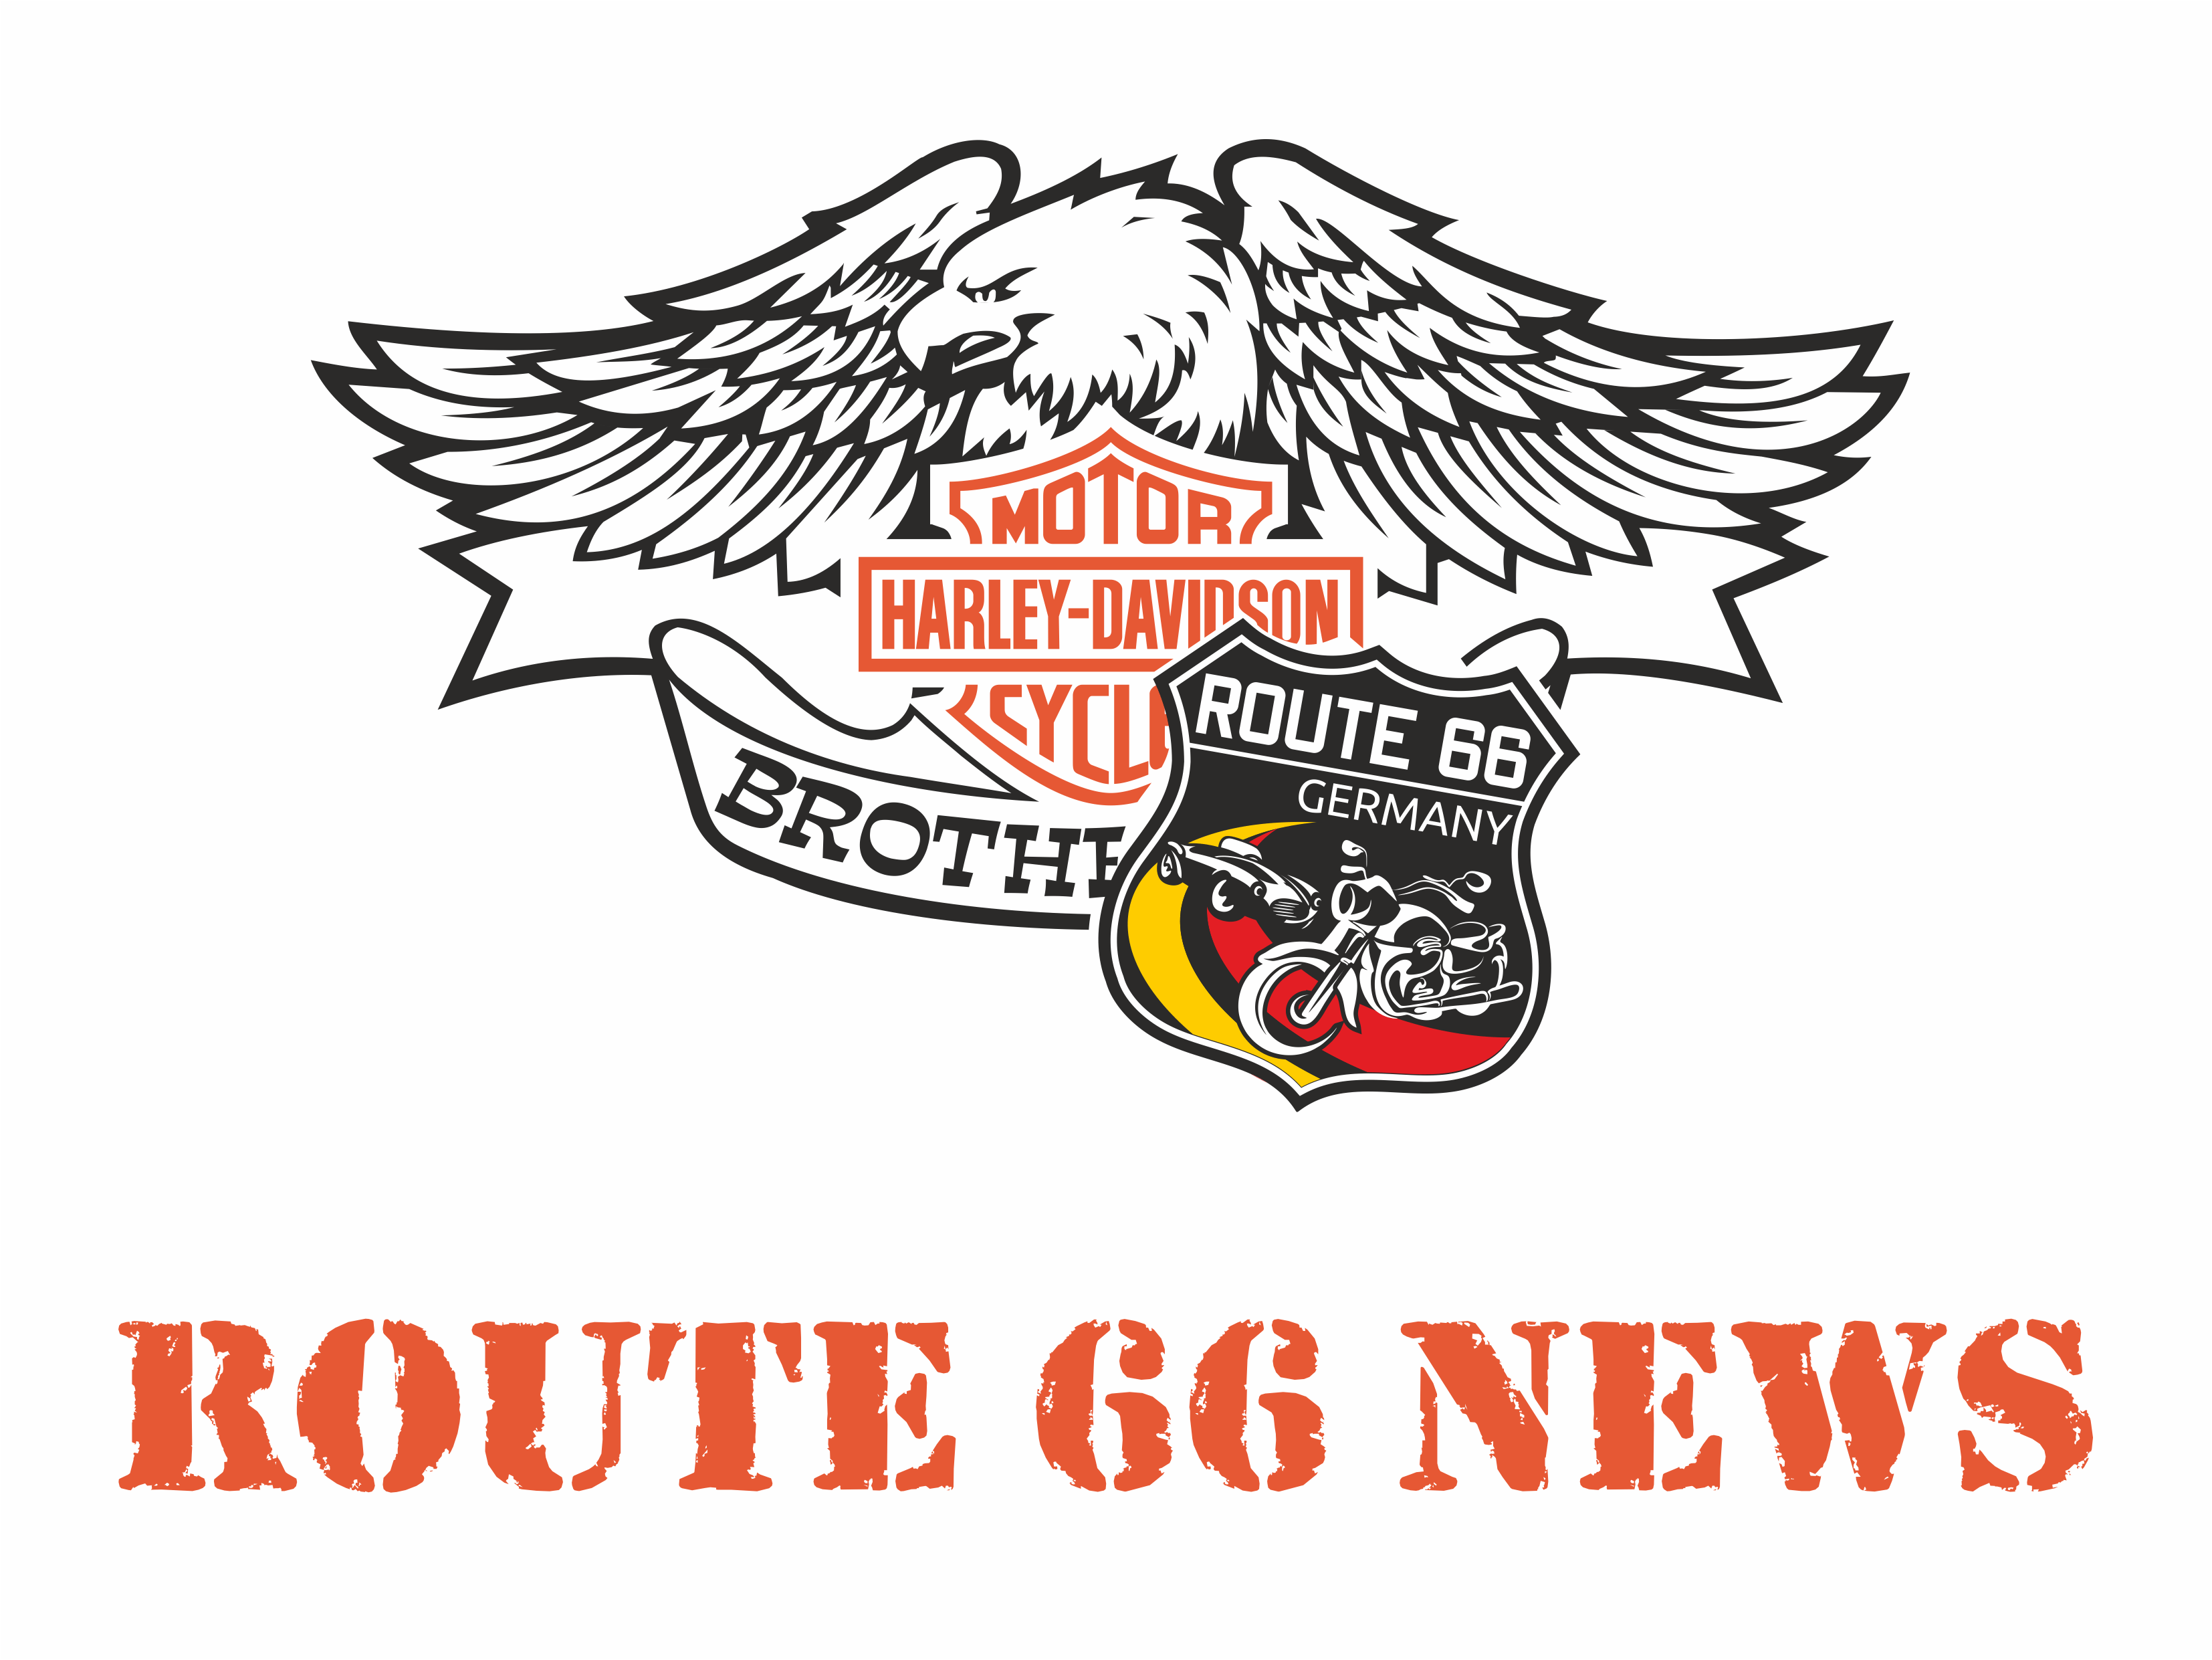 news route66